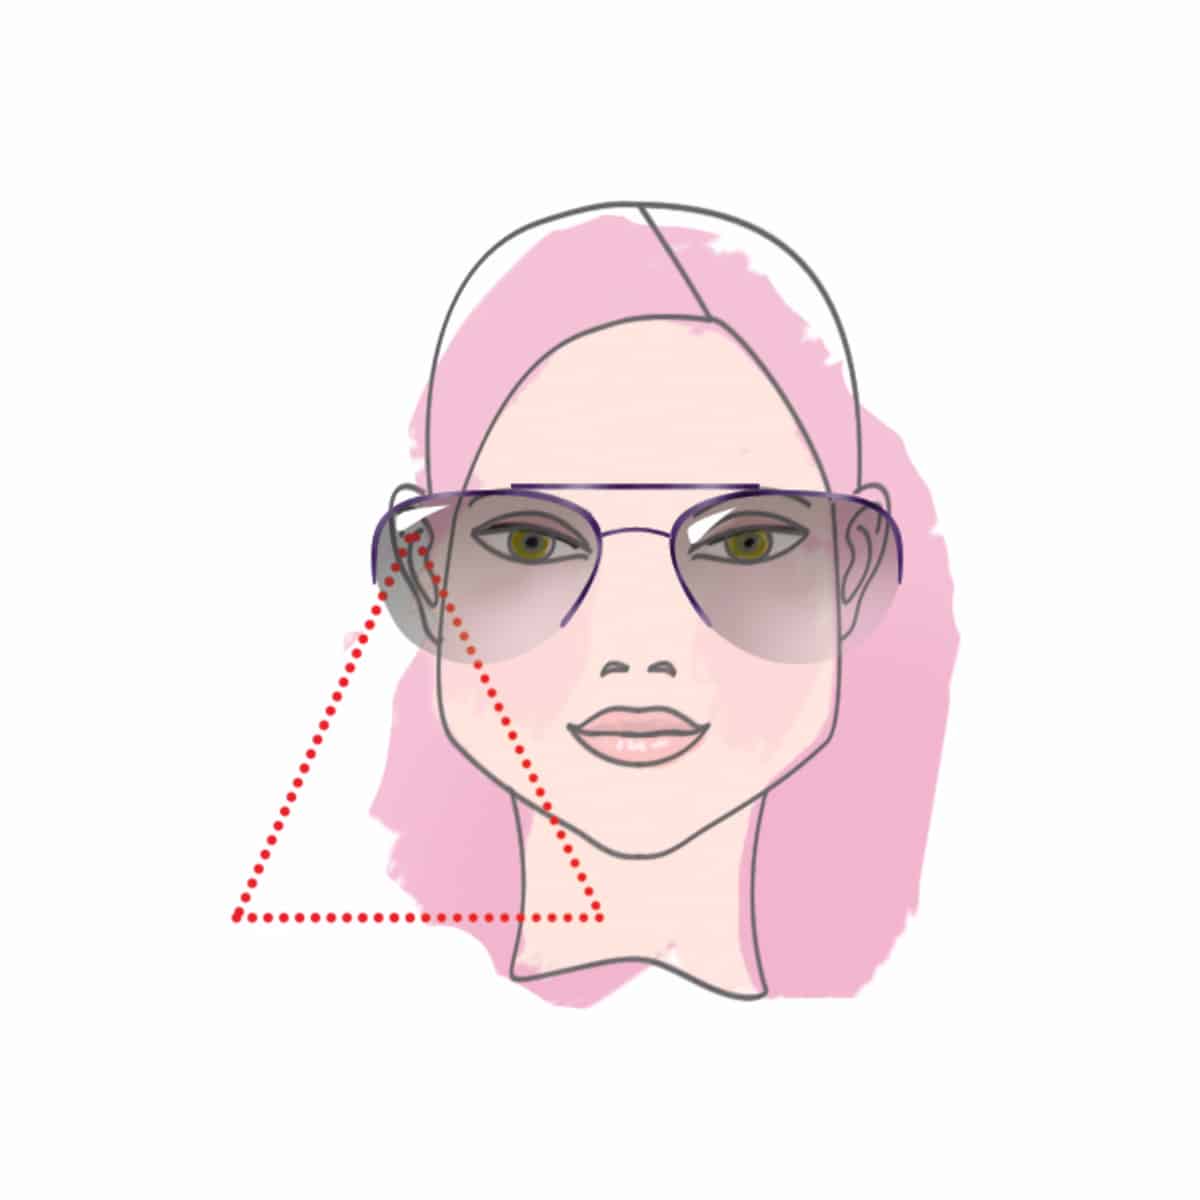 Woman with triangle face type - illustration